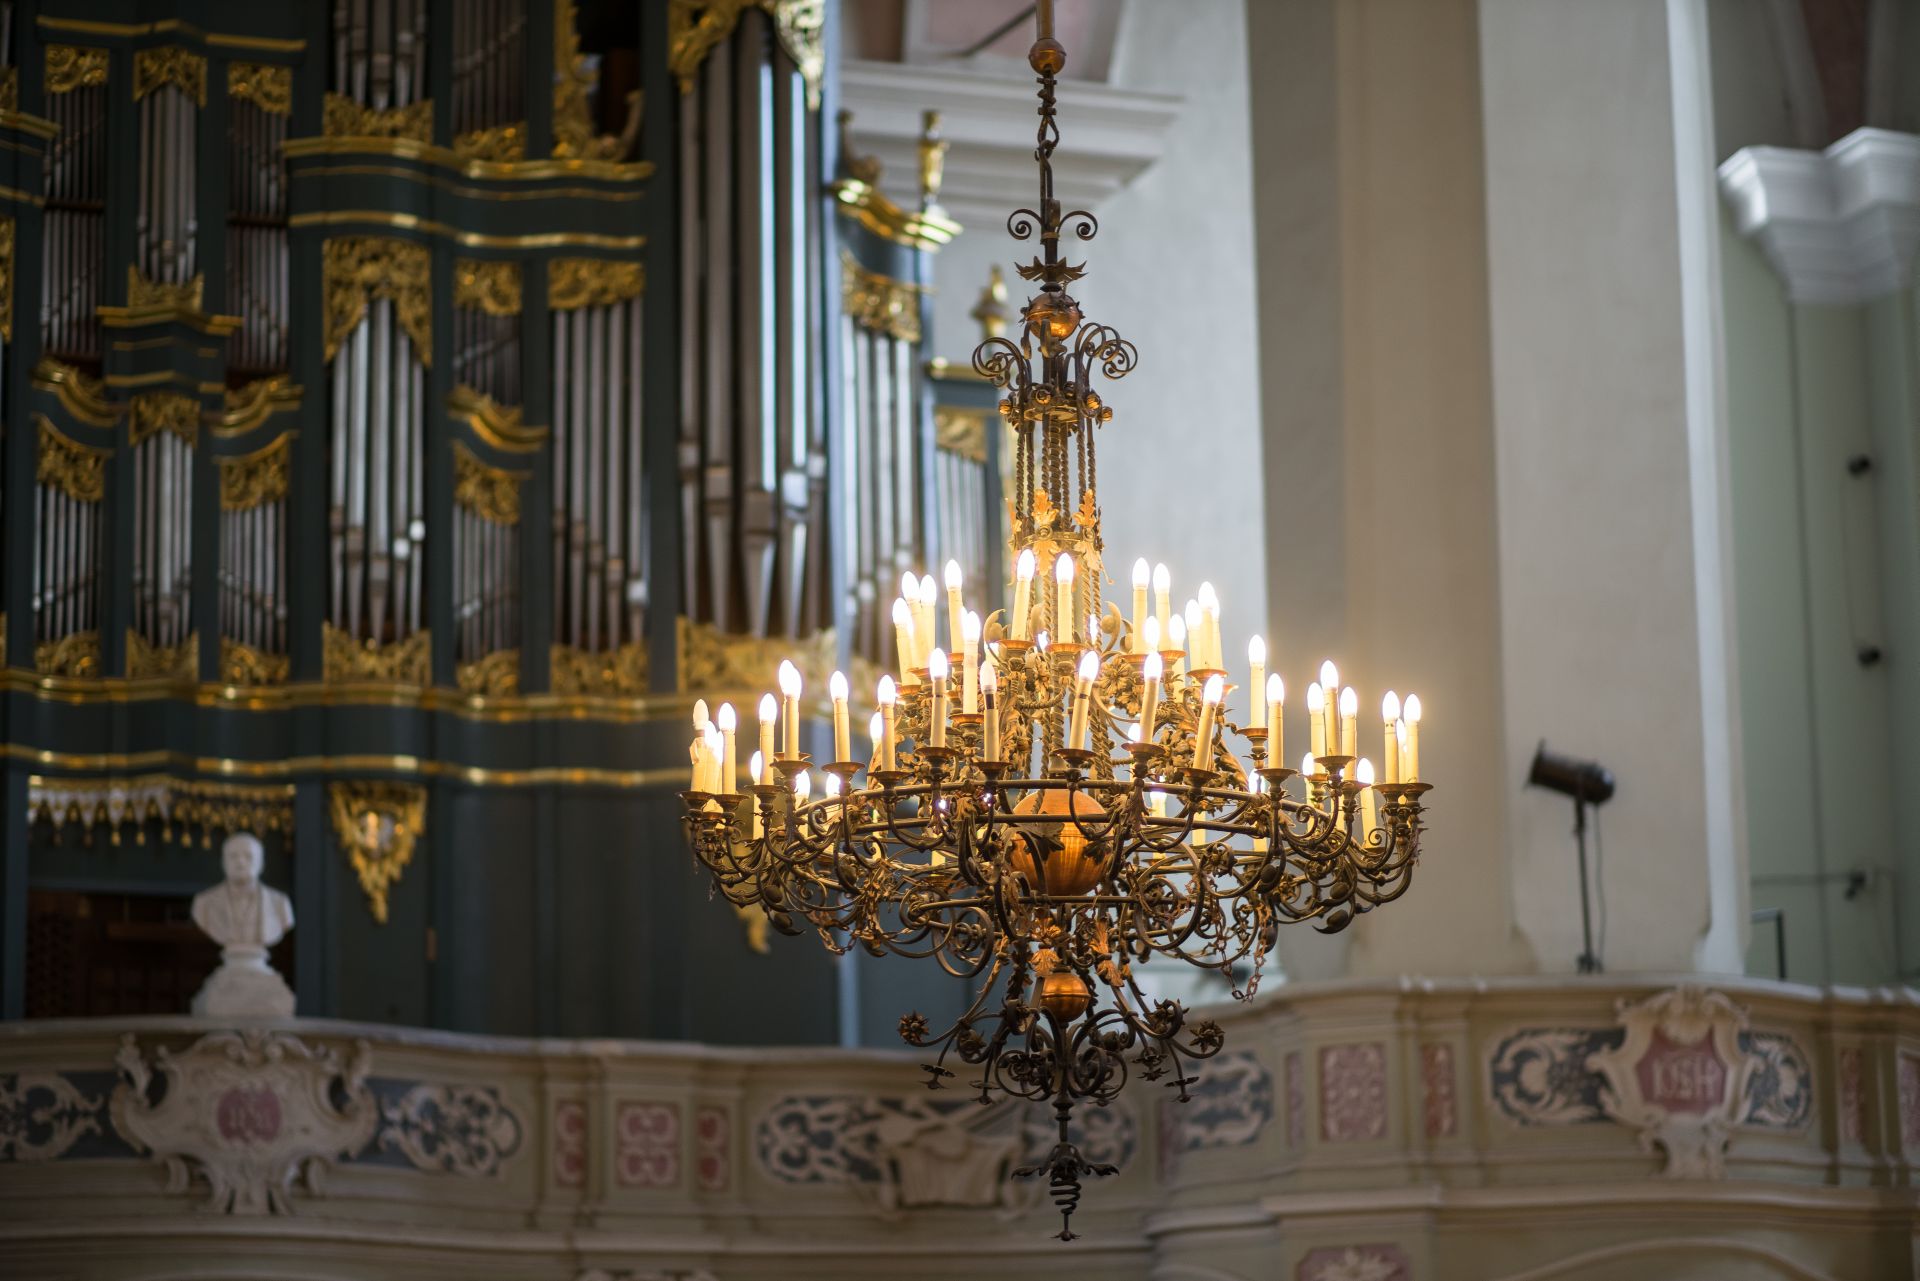 Chandelier at the Church of John the Baptist and St. John the Apostle and Evangelist in Vilnius. Photo by Povilas Jarmala, 2017